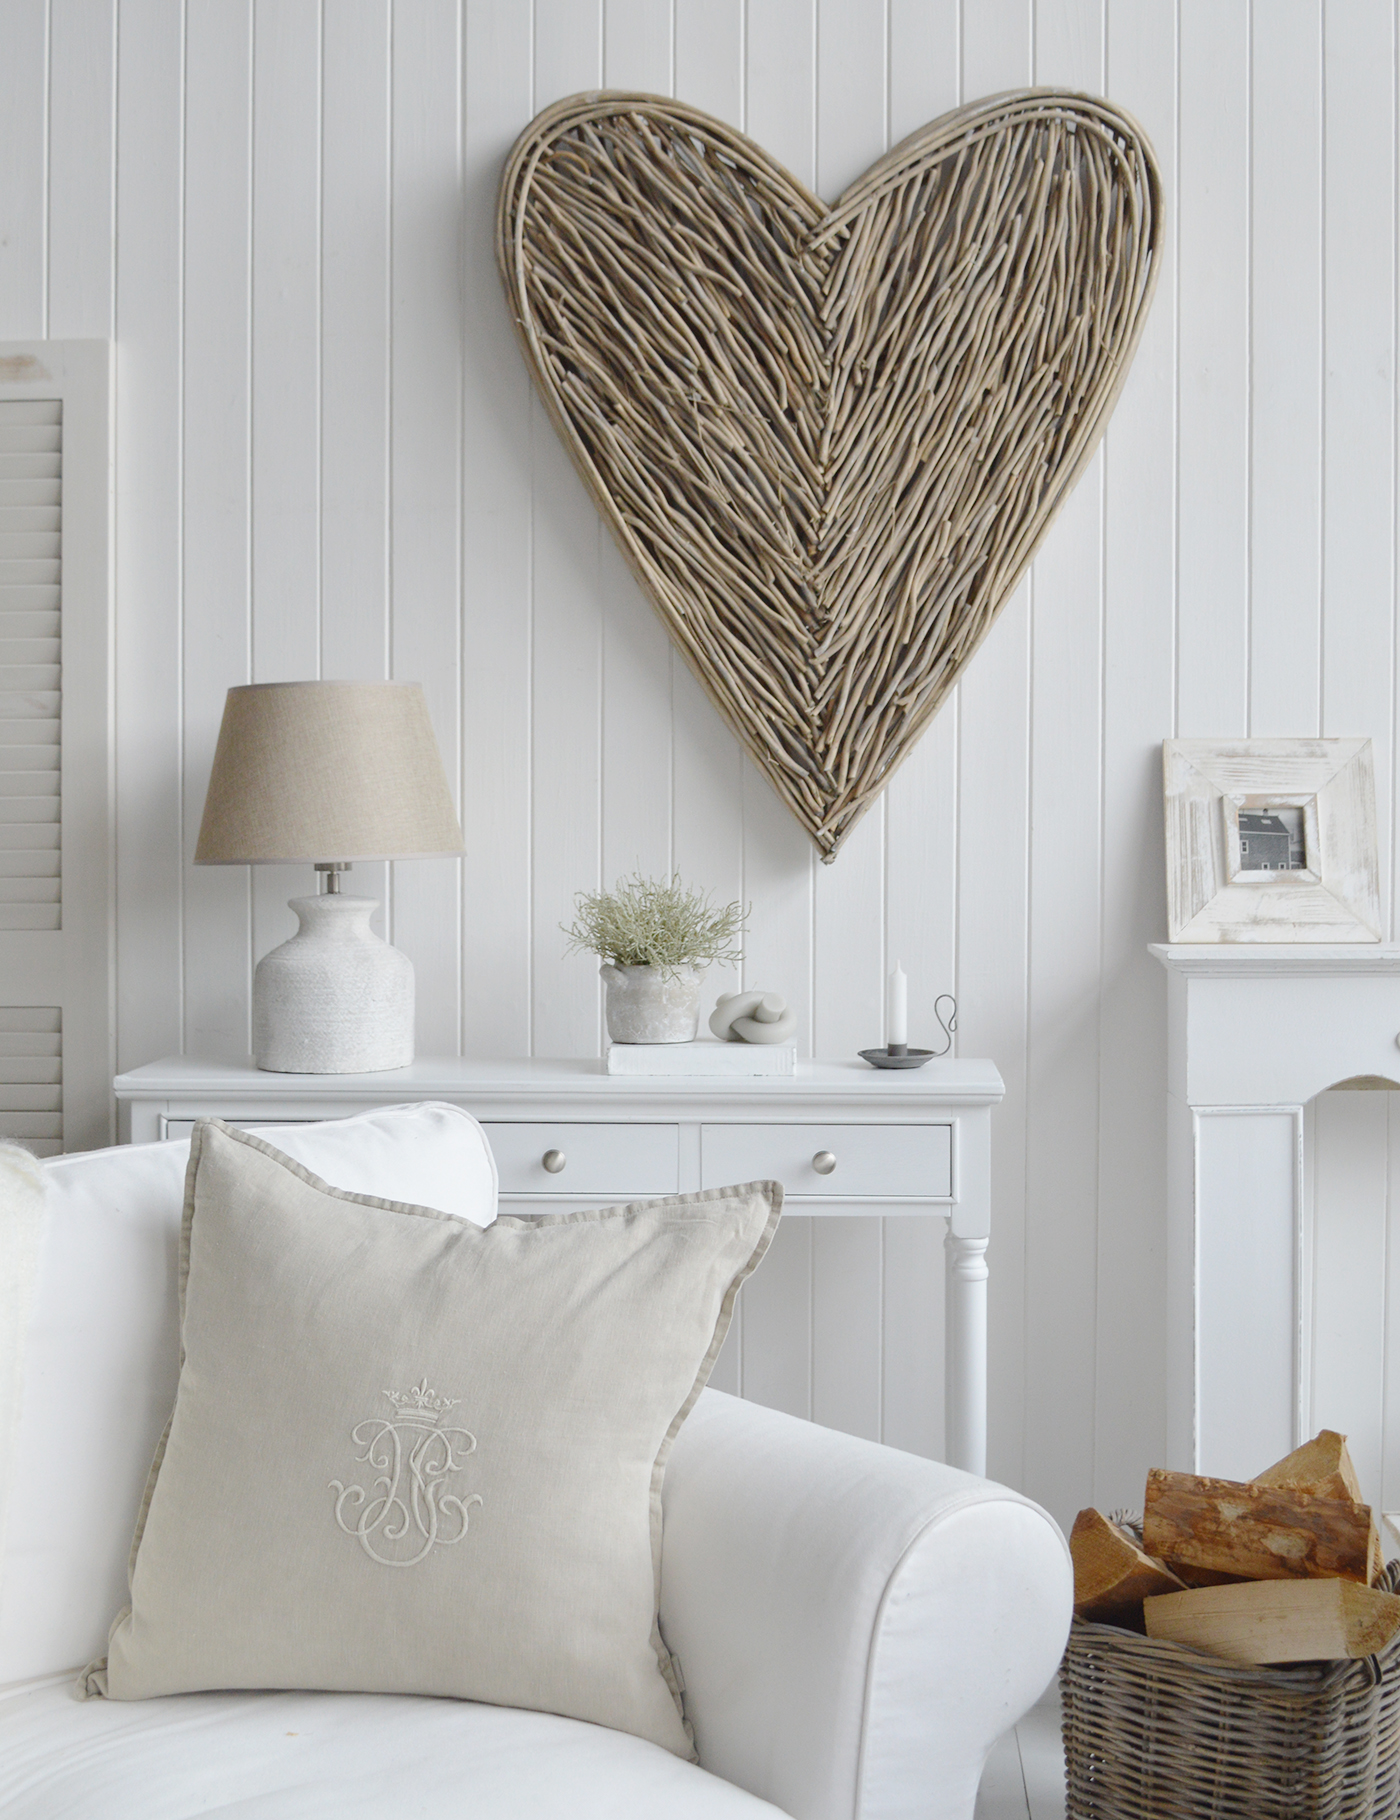 Neutral cushions and throws add to the warmth of a room when choosing a traditional modern country styled room